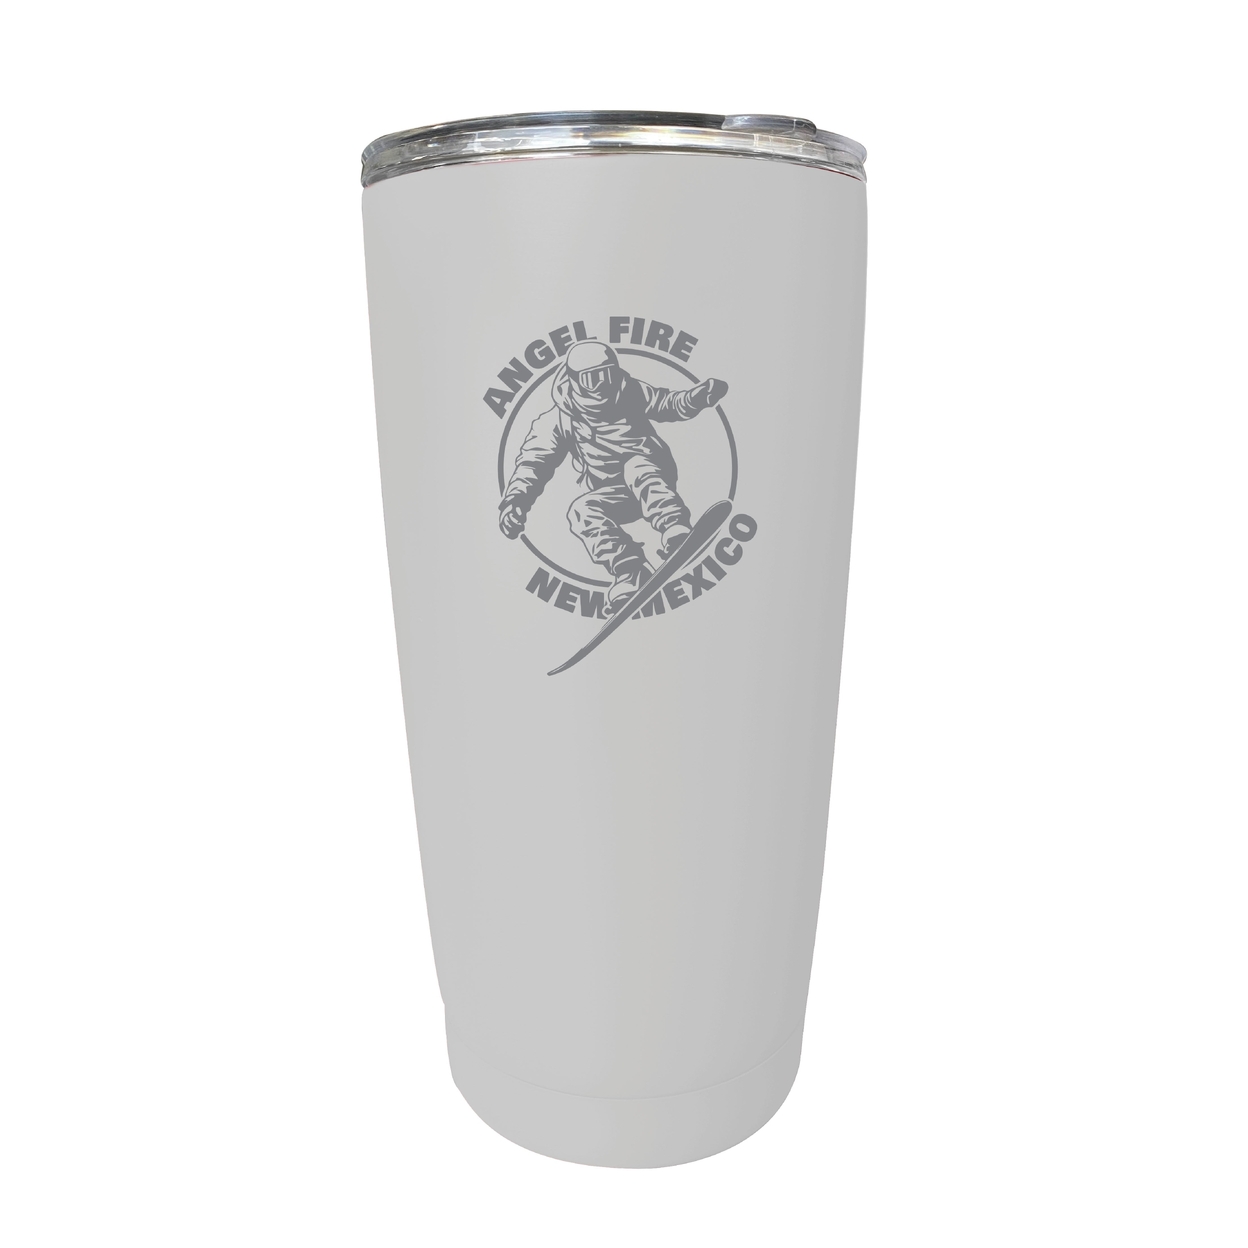 Angel Fire New Mexico Souvenir 16 Oz Engraved Stainless Steel Insulated Tumbler - White,,Single Unit